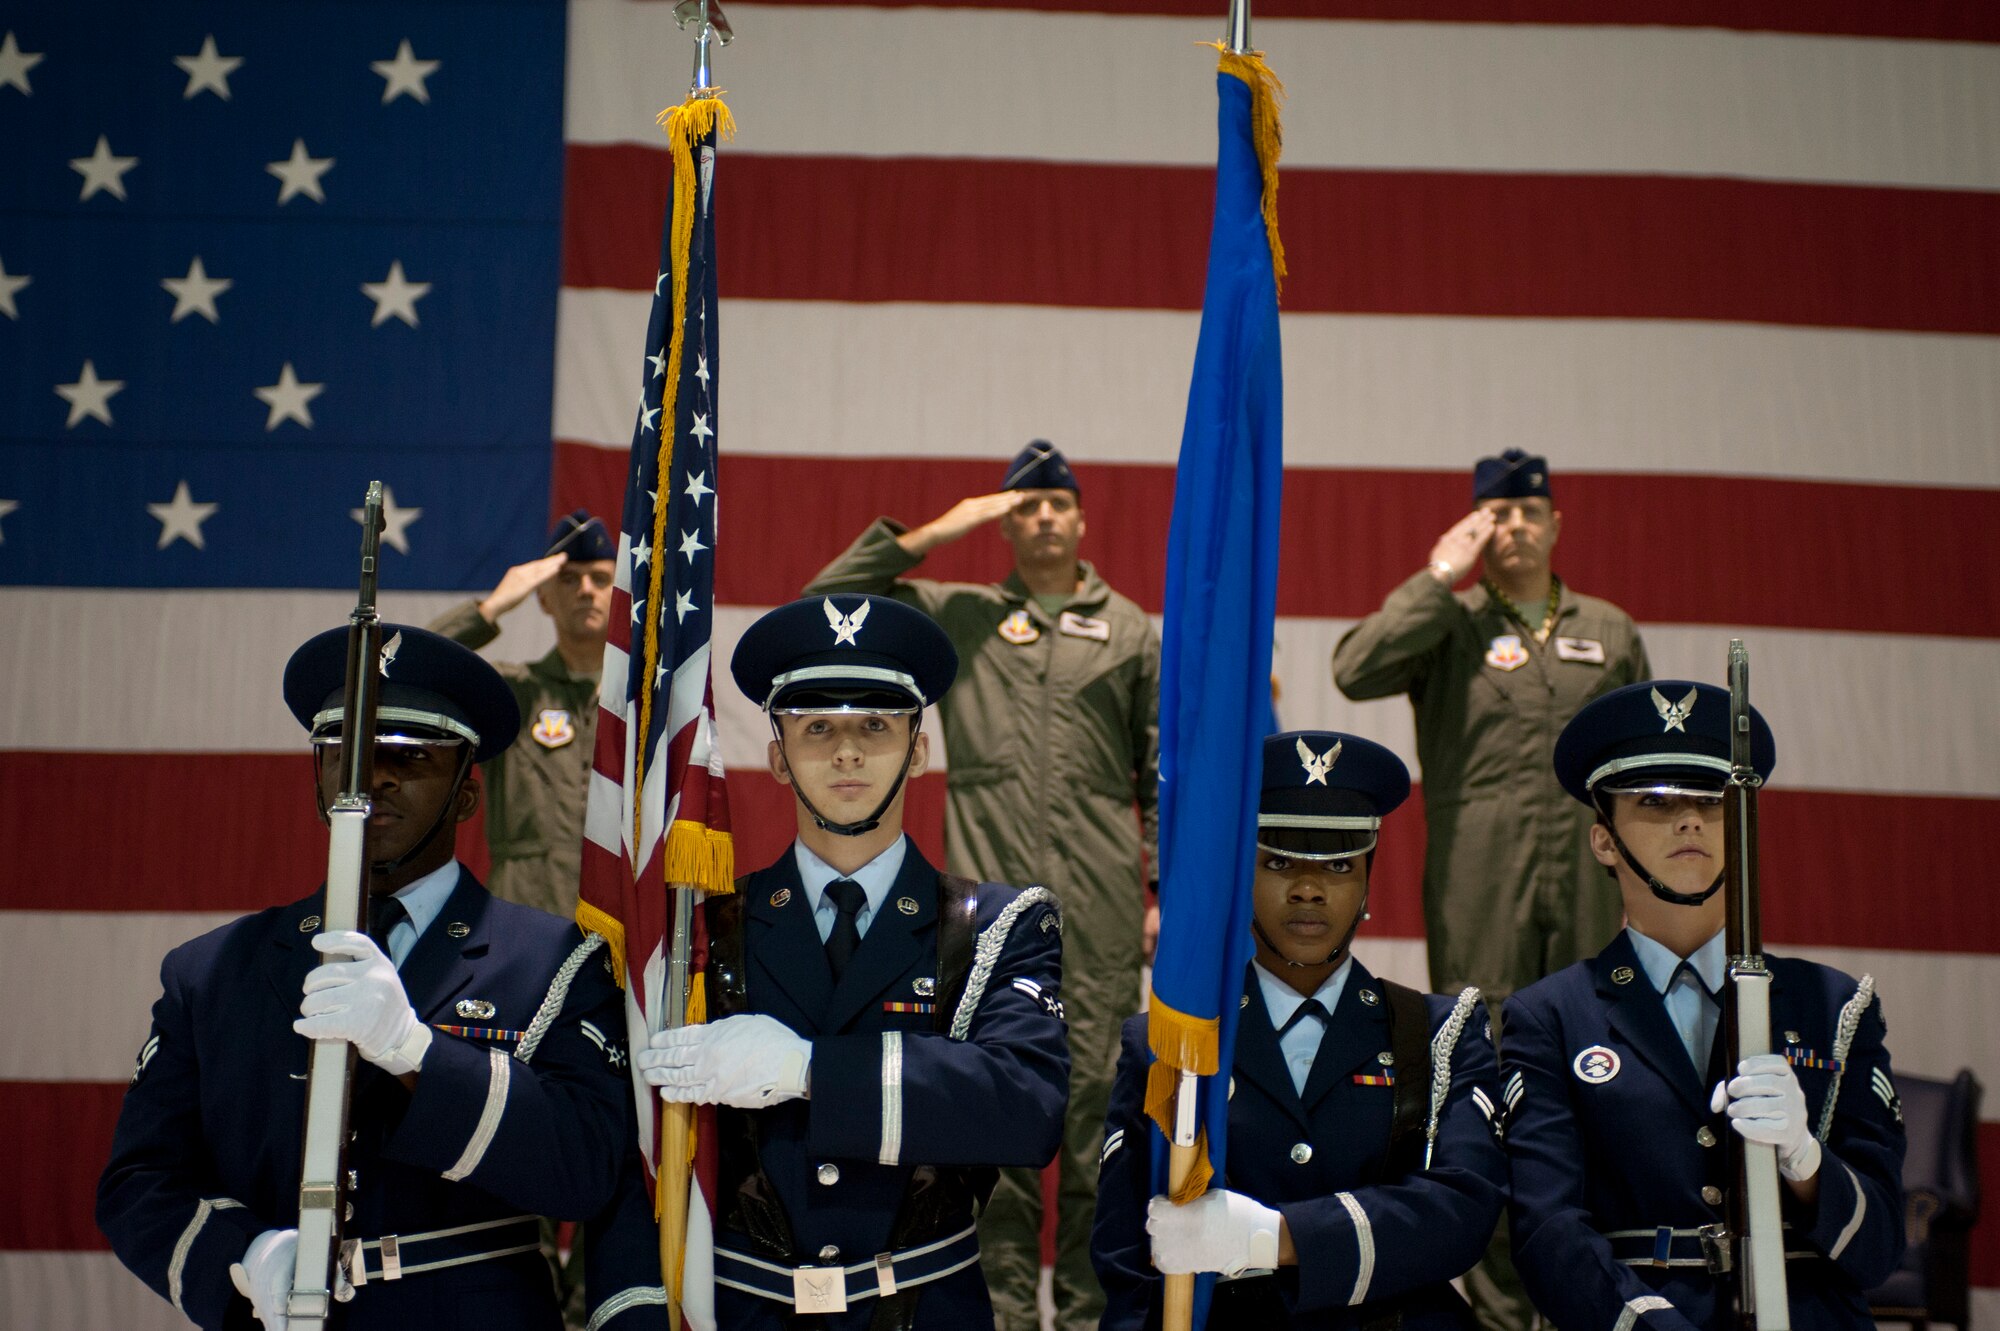 The Nellis Air Force Base Honor Guard presents the colors during the 57th Wing change of command ceremony Feb. 28, 2014 at Nellis AFB Nev.  Col. Christopher Short, 57th WG’s incoming commander, accepted command of the 57th WG during a ceremony in the Thunderbird hanger. (U.S. Air Force photo by Airman 1st Class Timothy Young)